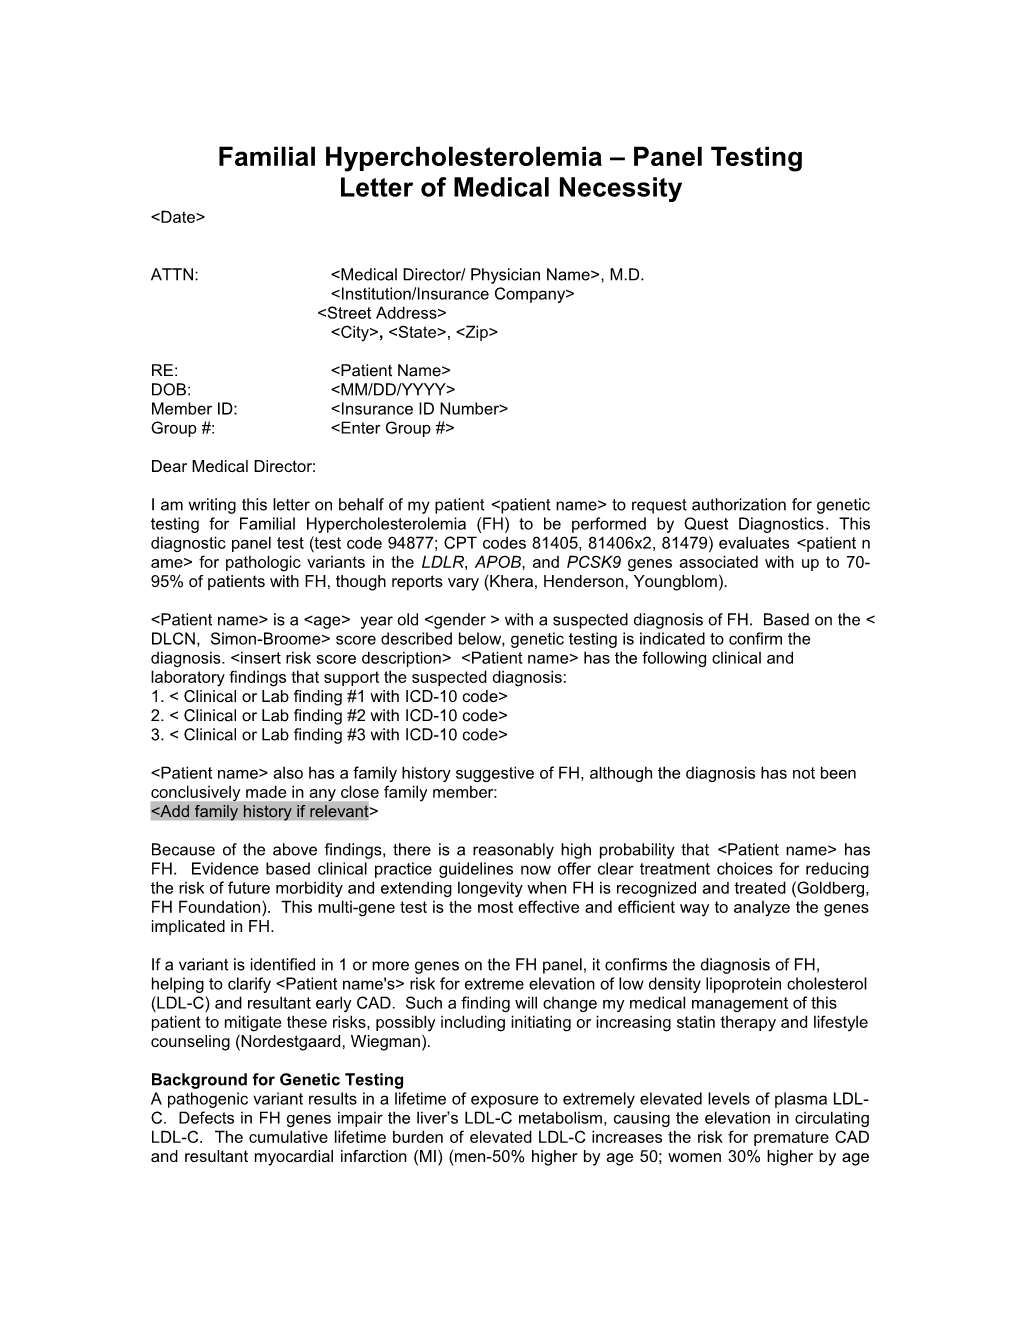 Familial Hypercholesterolemia Panel Testing Letter of Medical Necessity